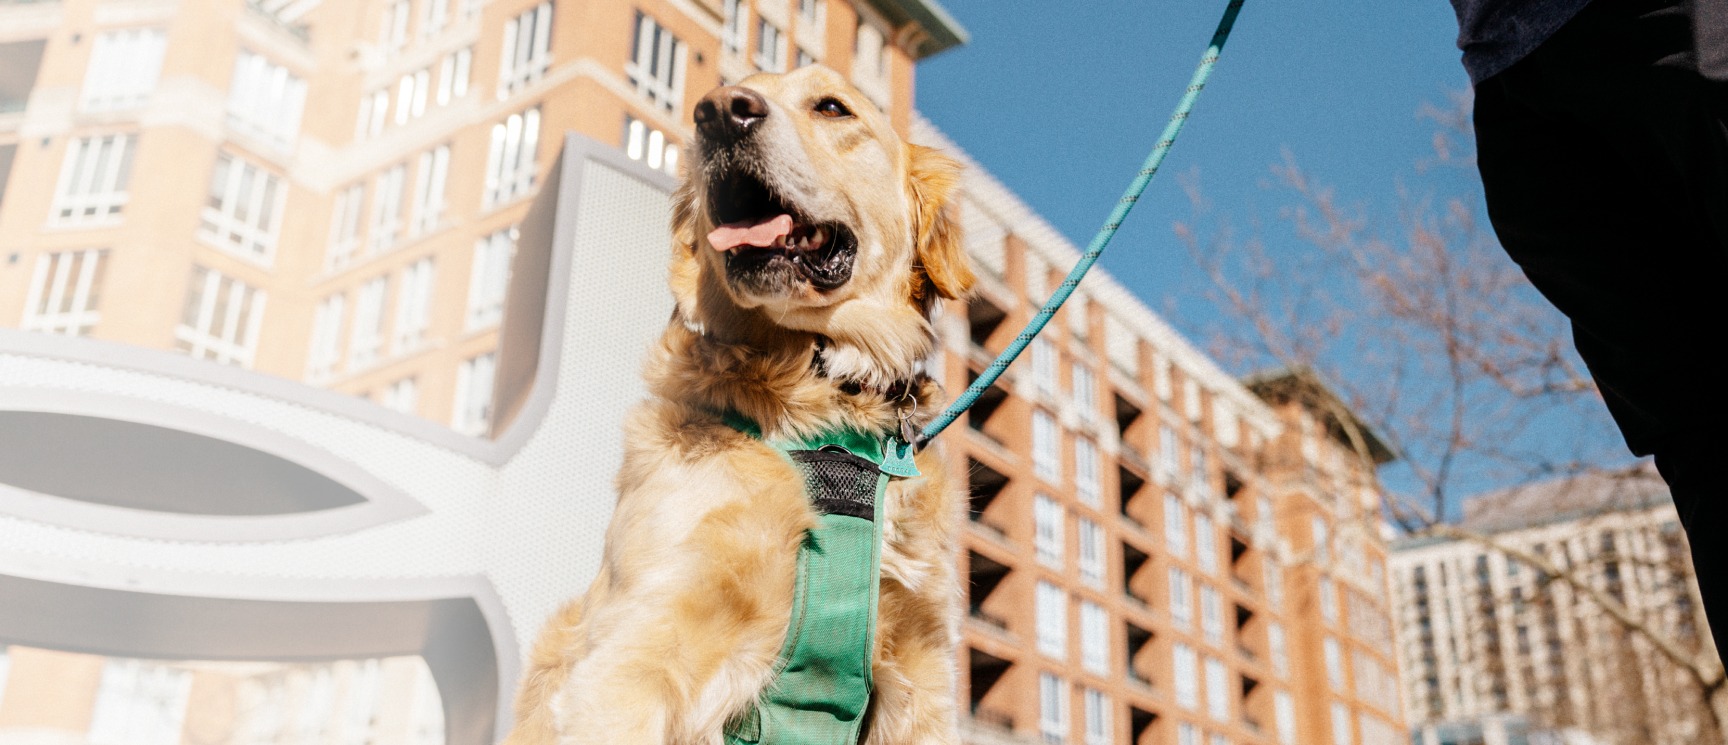 Golden retriever sitting in front of the Under Armour logo in Harbor East